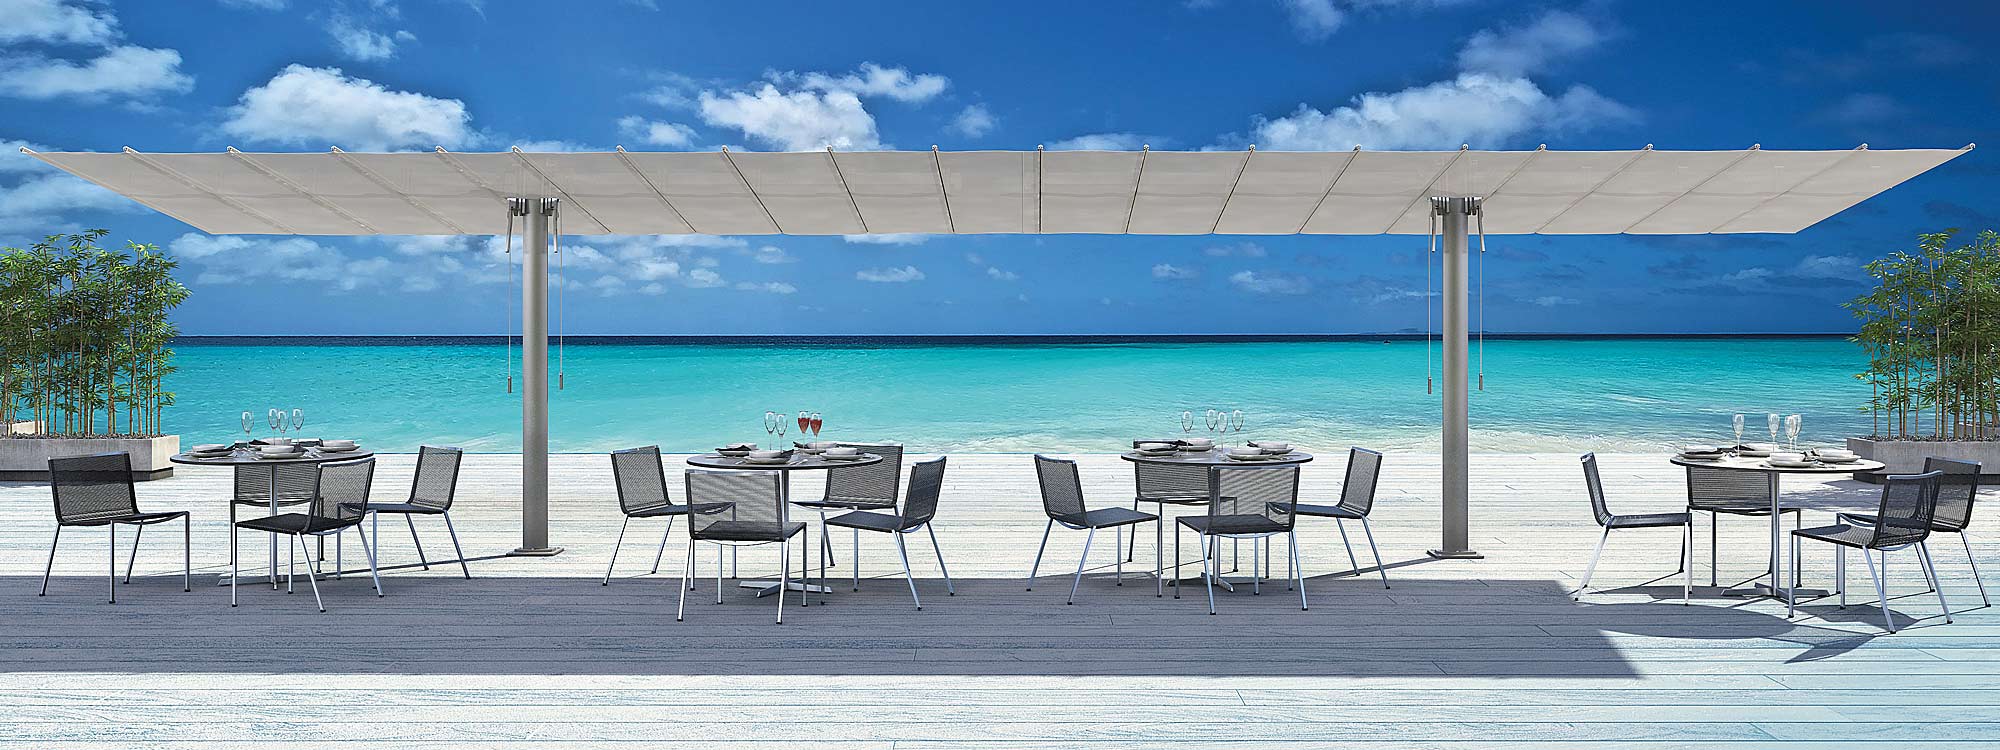 Image of a pair of FIM Flexy Twin free-standing retractable shades placed together, with Coro outdoor furniture beneath, shown on wooden decking with beach and blue sea and sky in the background